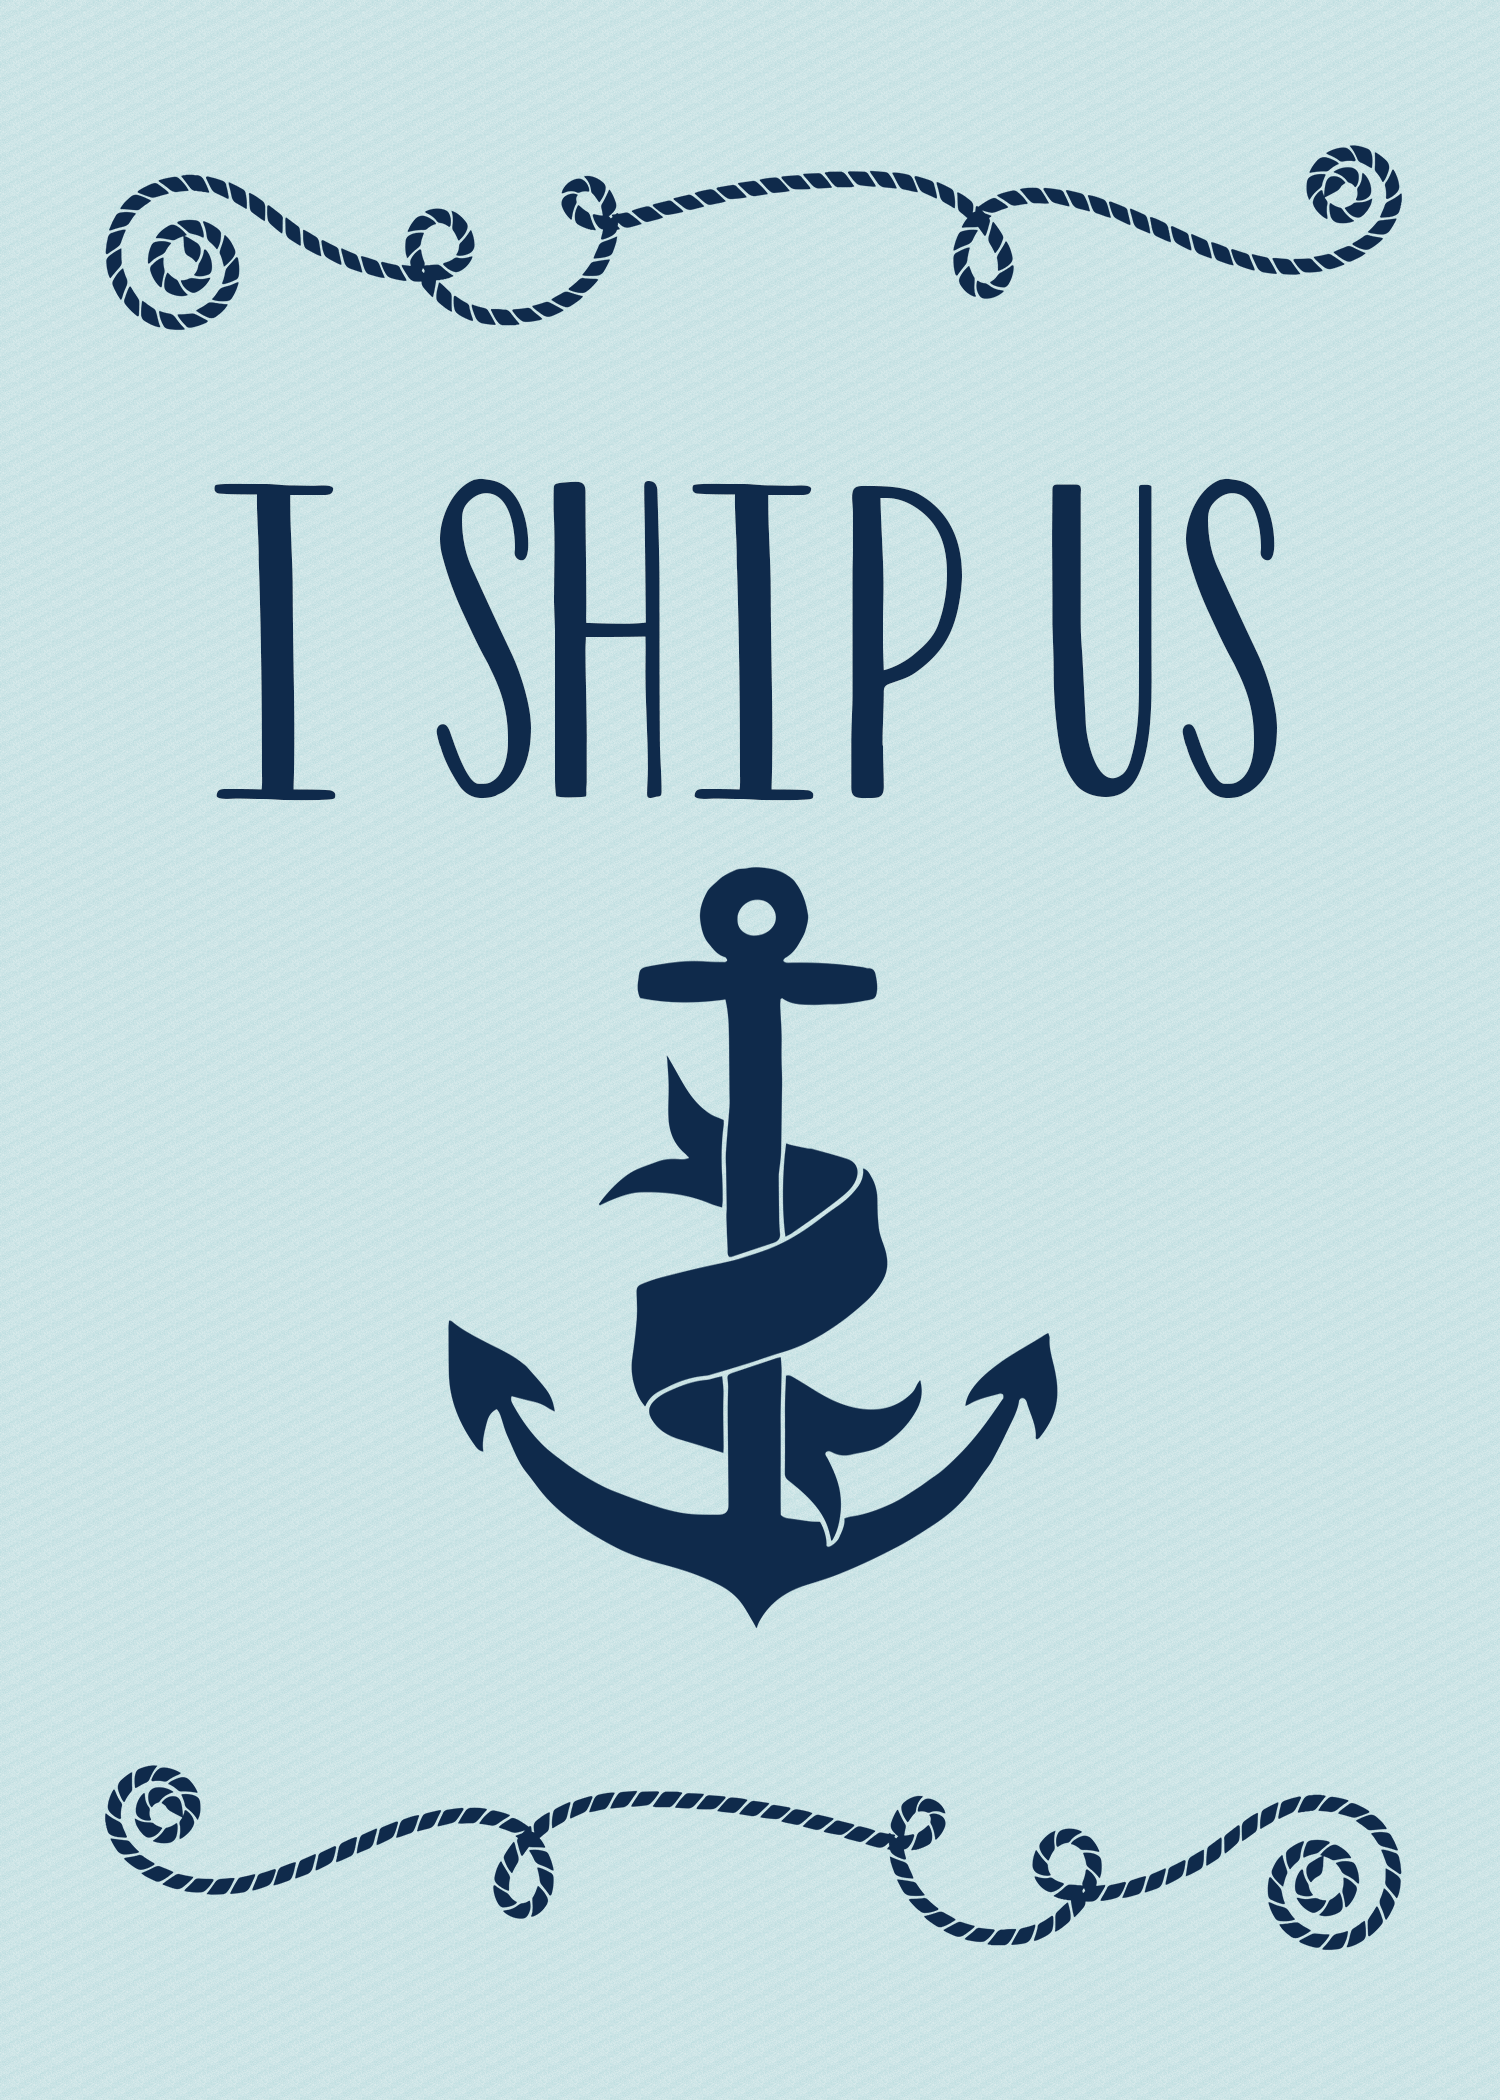 i ship us - valentines day card